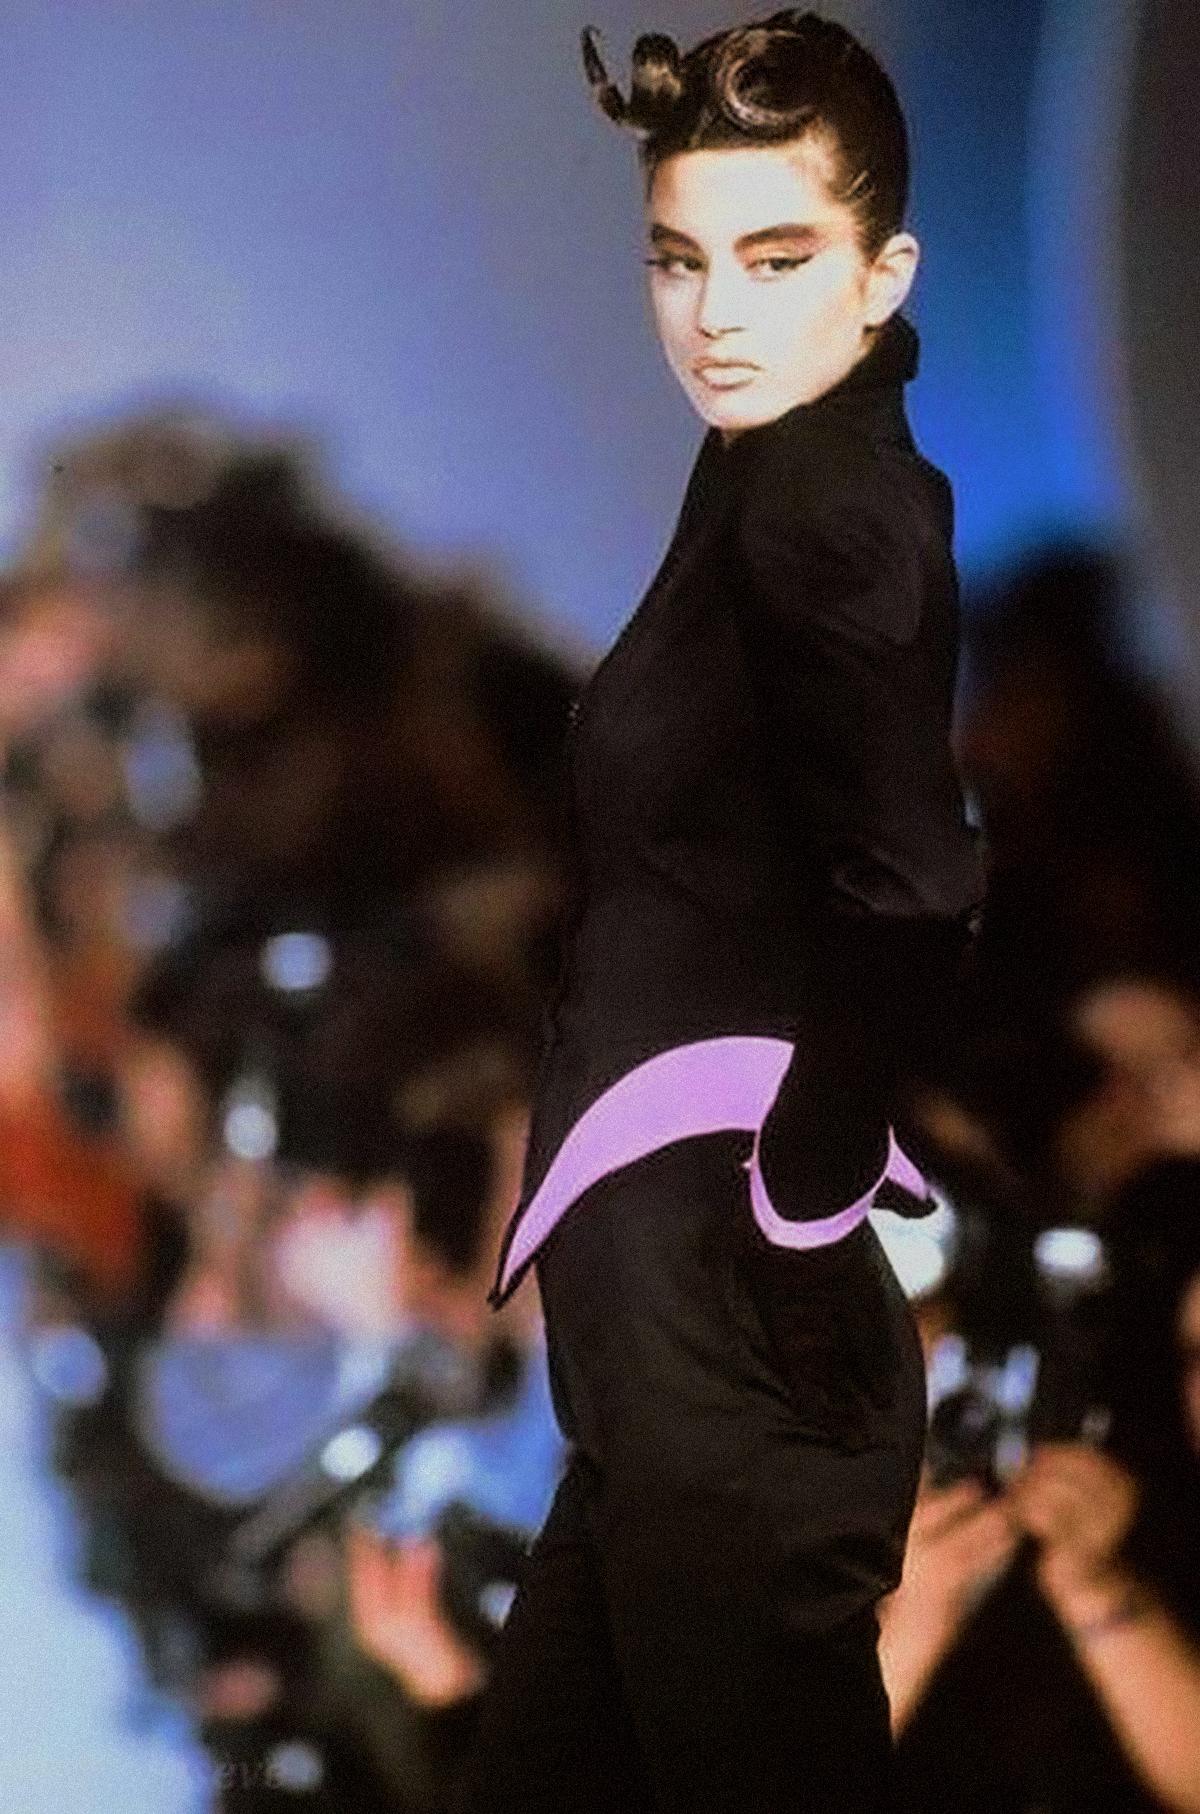 Iconic Thierry Mugler Sculptural Jacket FW 1988/89 Black Purple In Excellent Condition For Sale In Berlin, BE